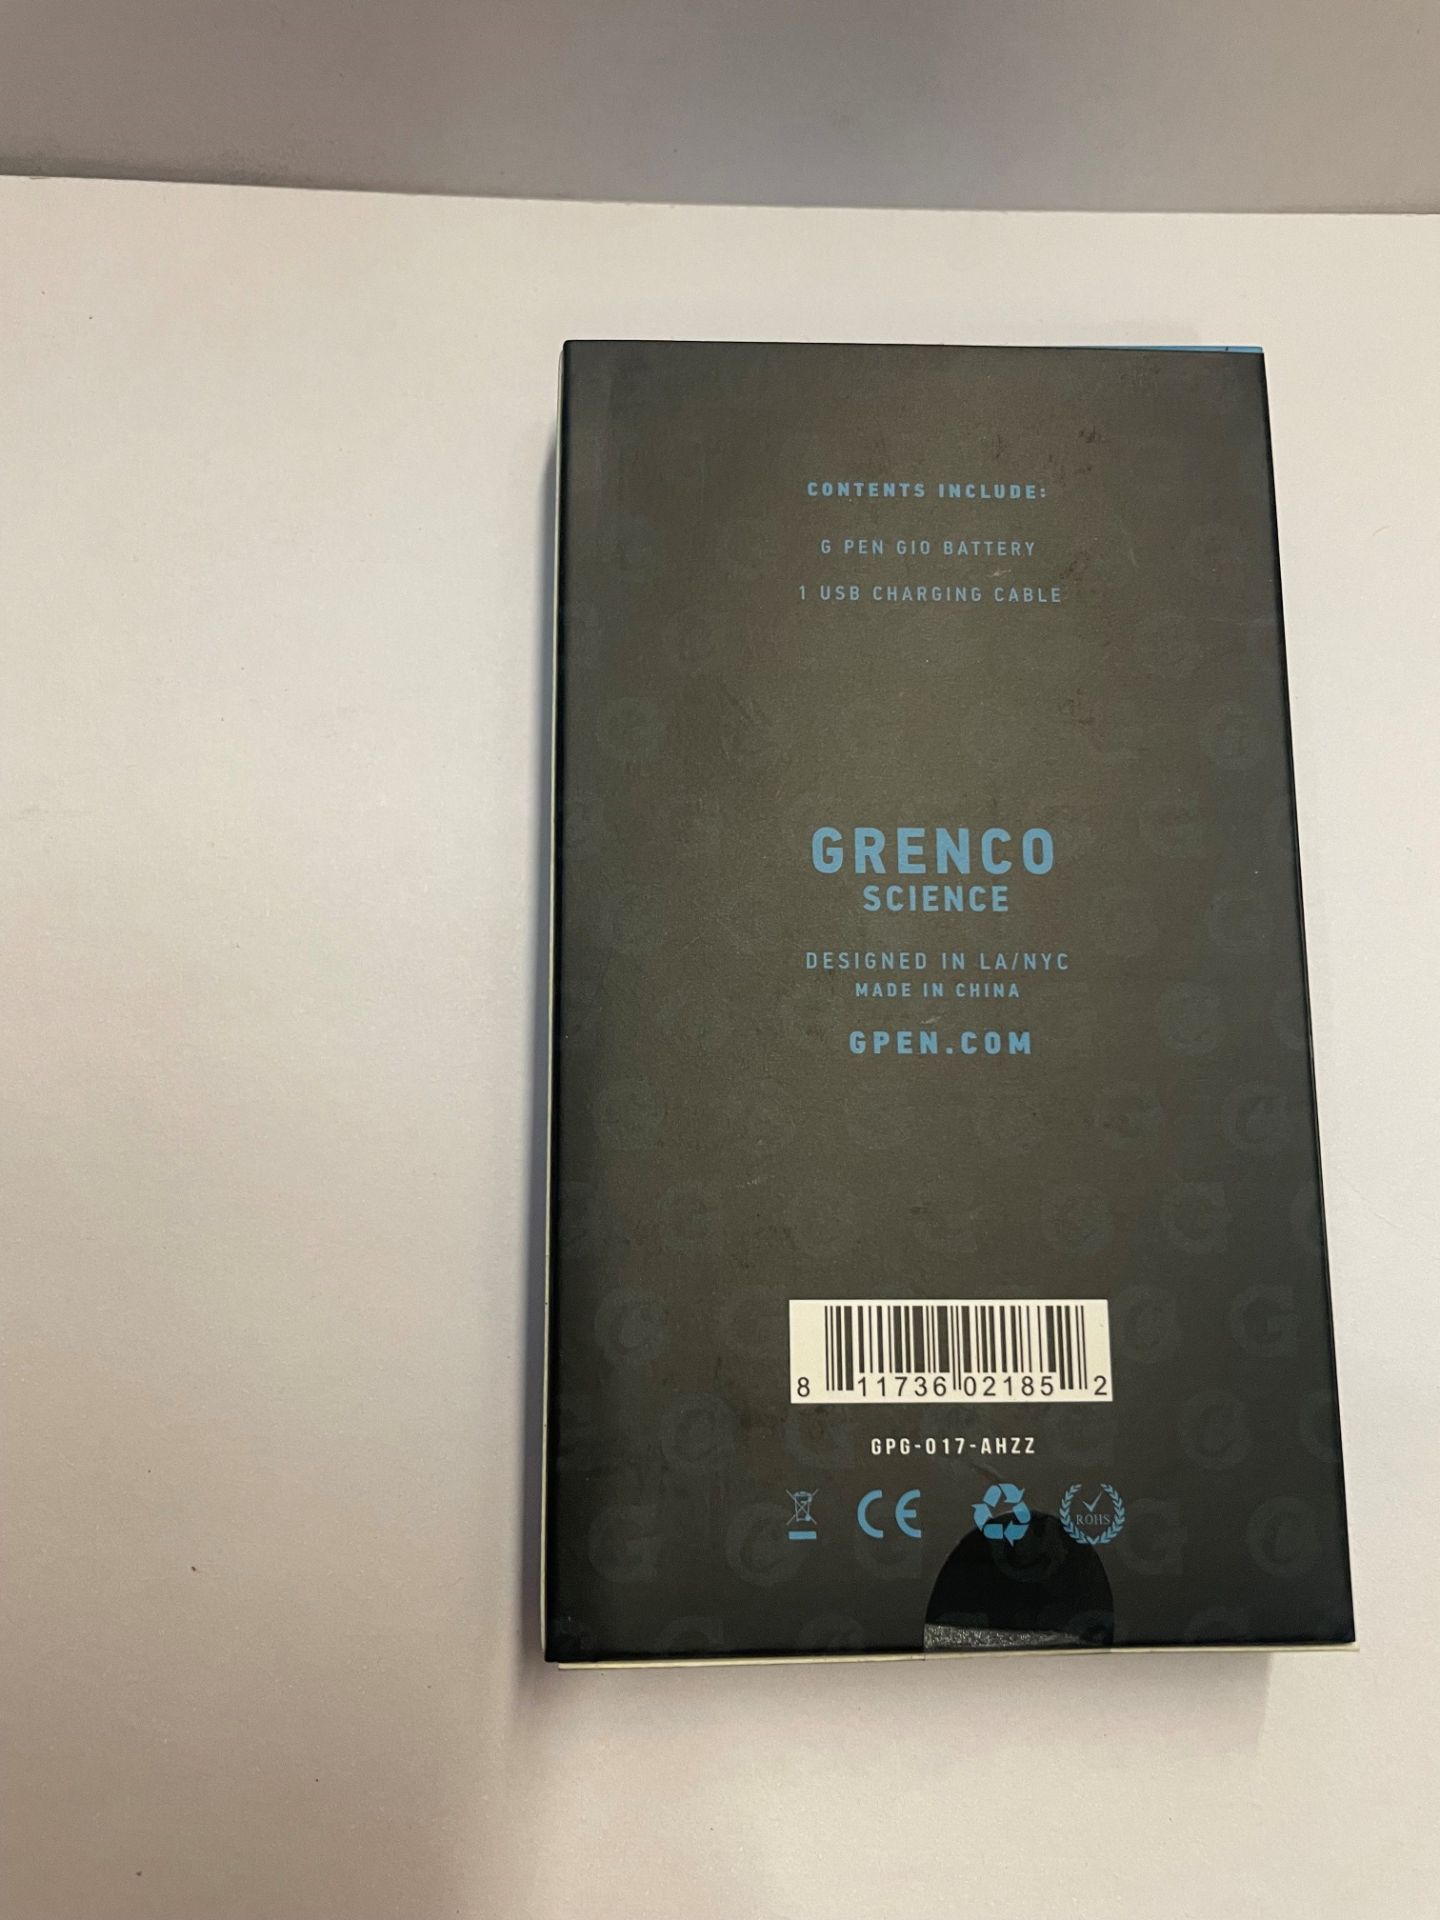 (Located in Moreno Valley, CA, US) Grenco Science G Pen Gio Black Cookies Battery, Qty 6,960 - Image 2 of 2